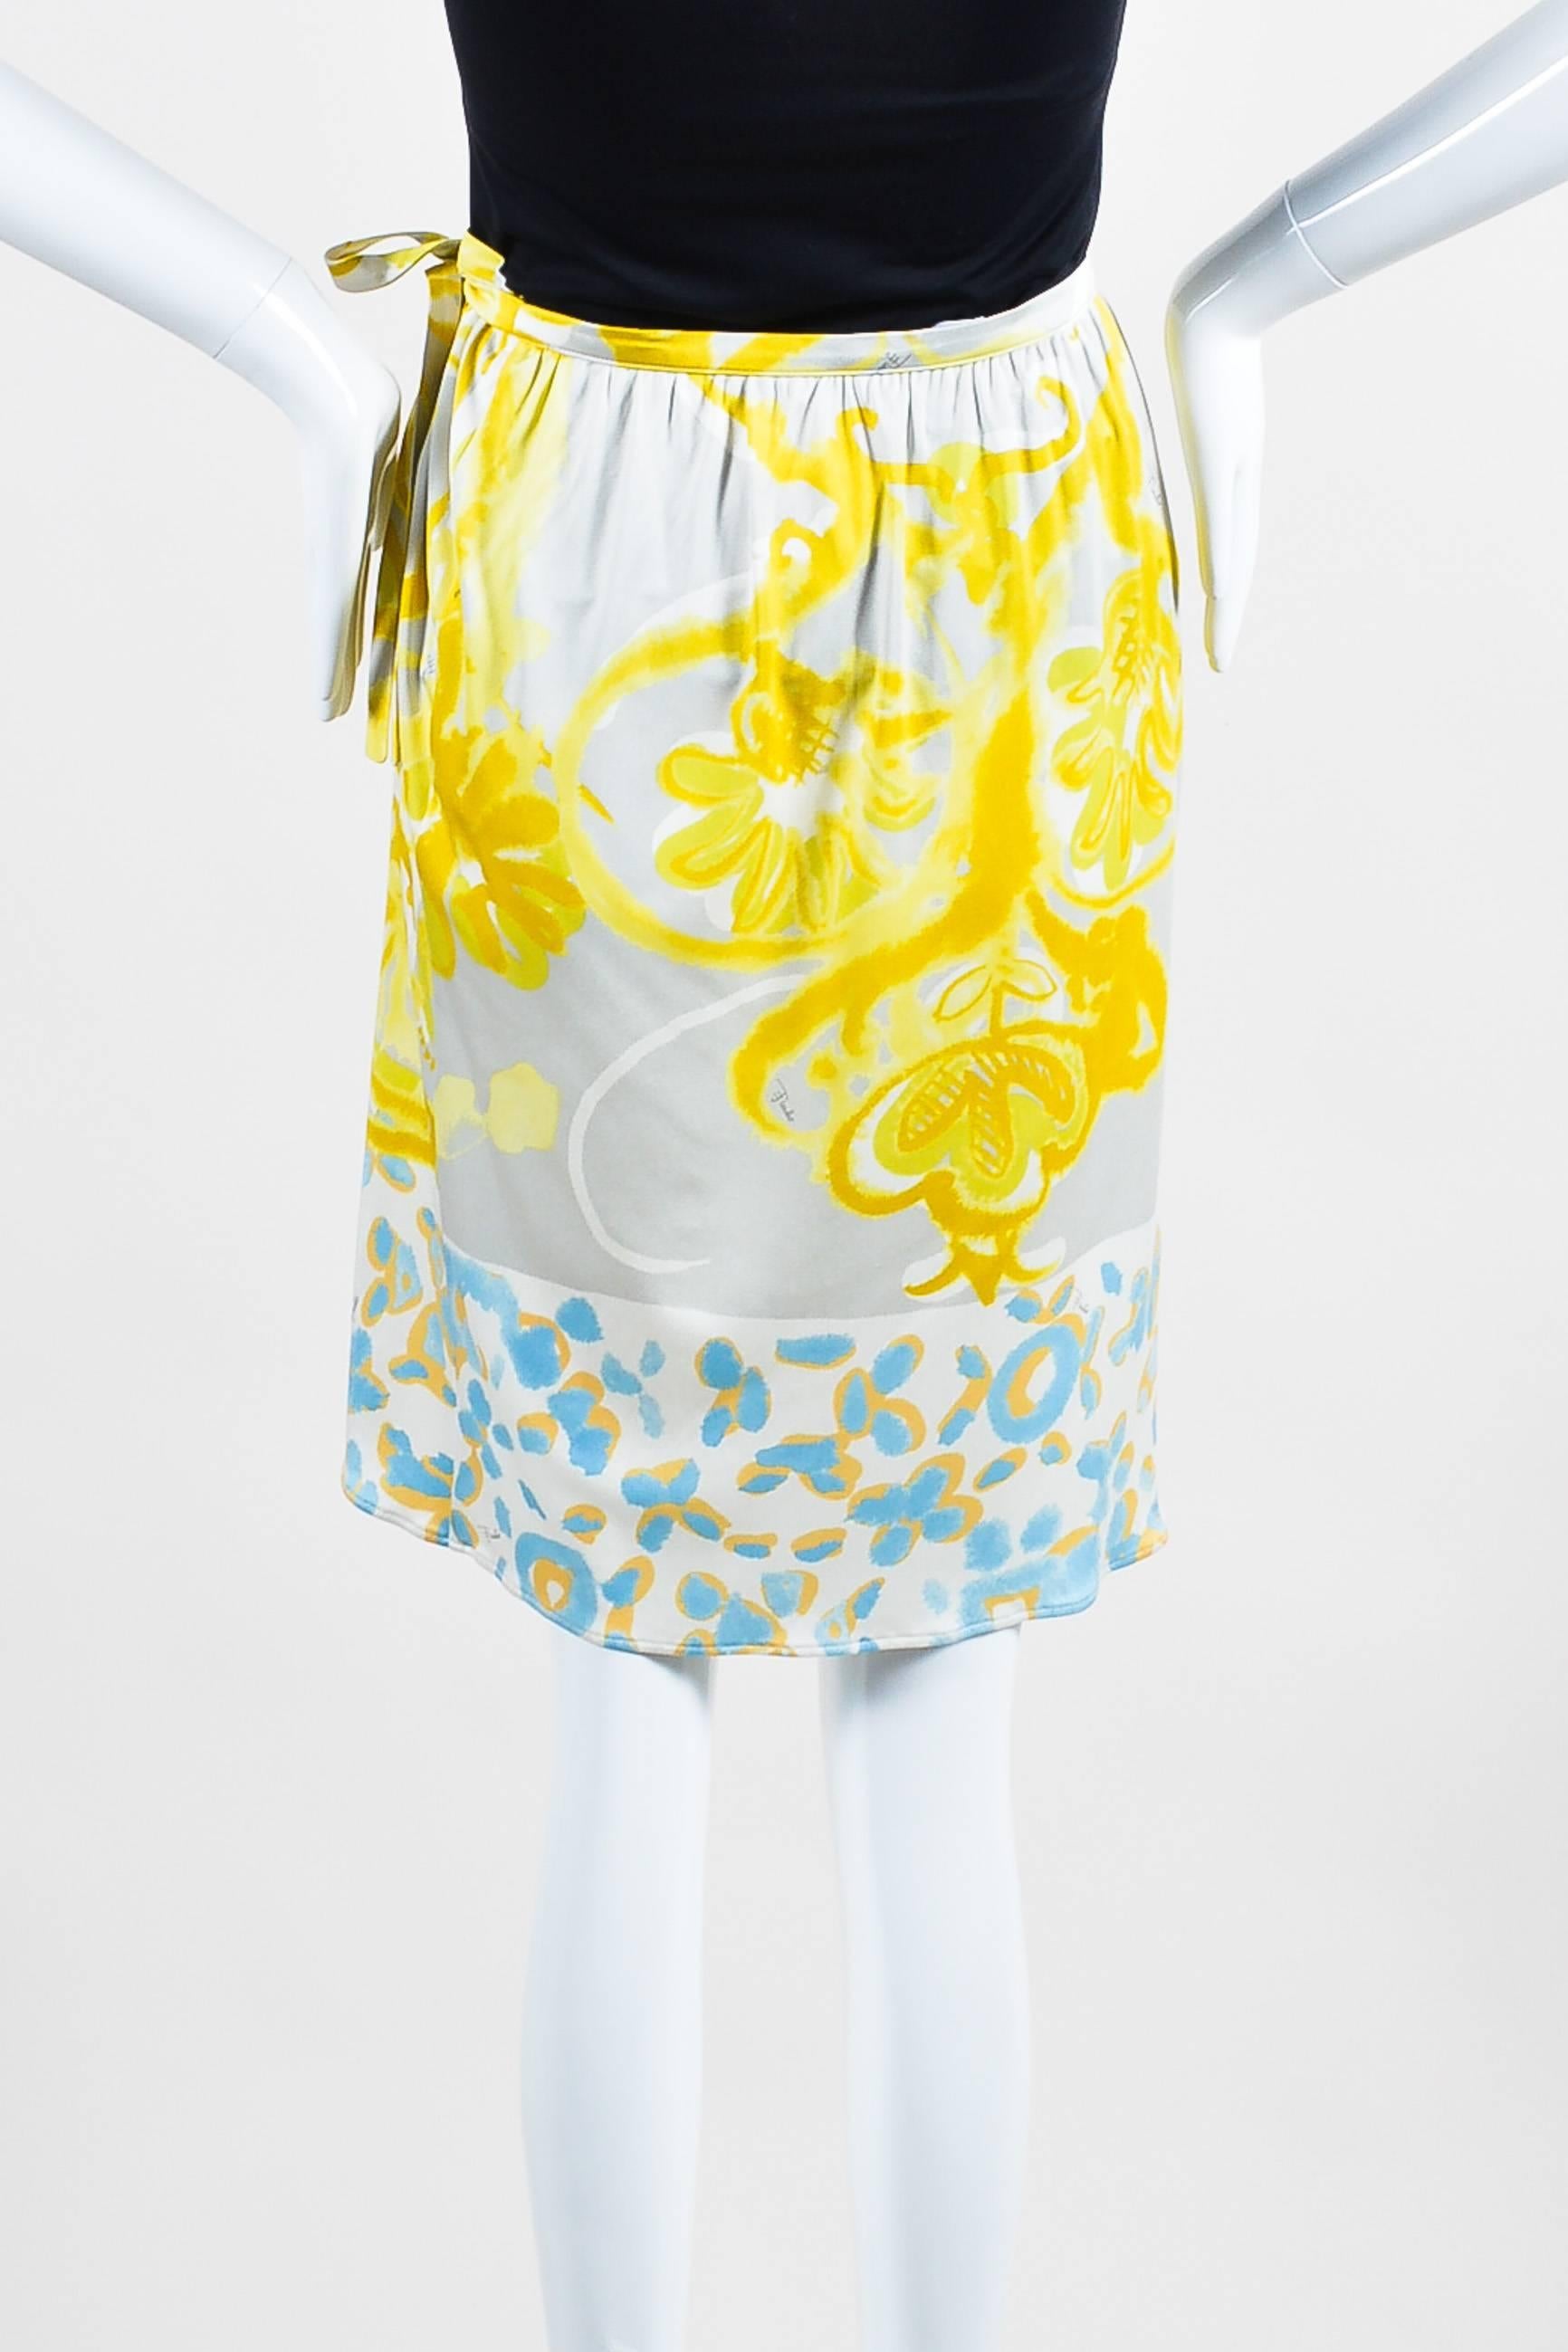 Emilio Pucci Yellow Blue Gray Silk Floral Watercolor Print Wrap Skirt SZ 4 In Excellent Condition For Sale In Chicago, IL